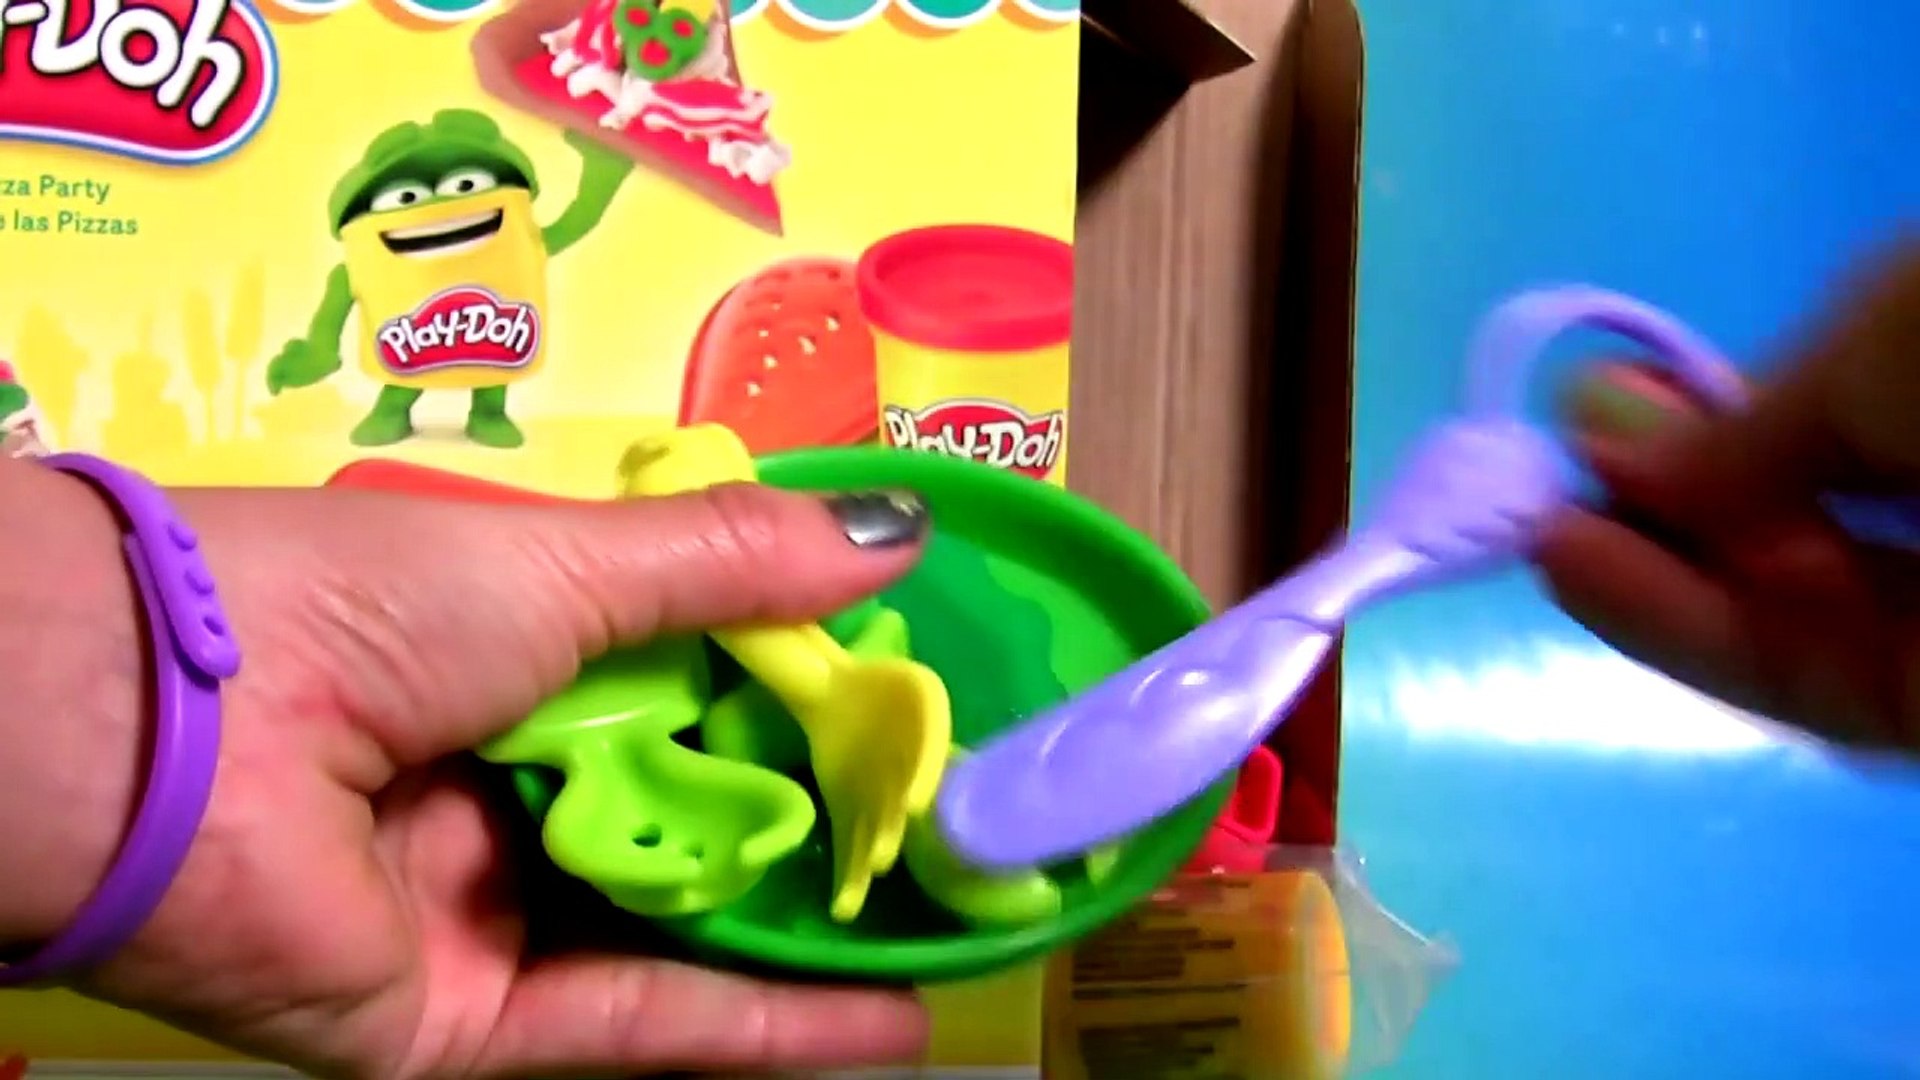 Play Doh Pizza Party Playset- - video Dailymotion